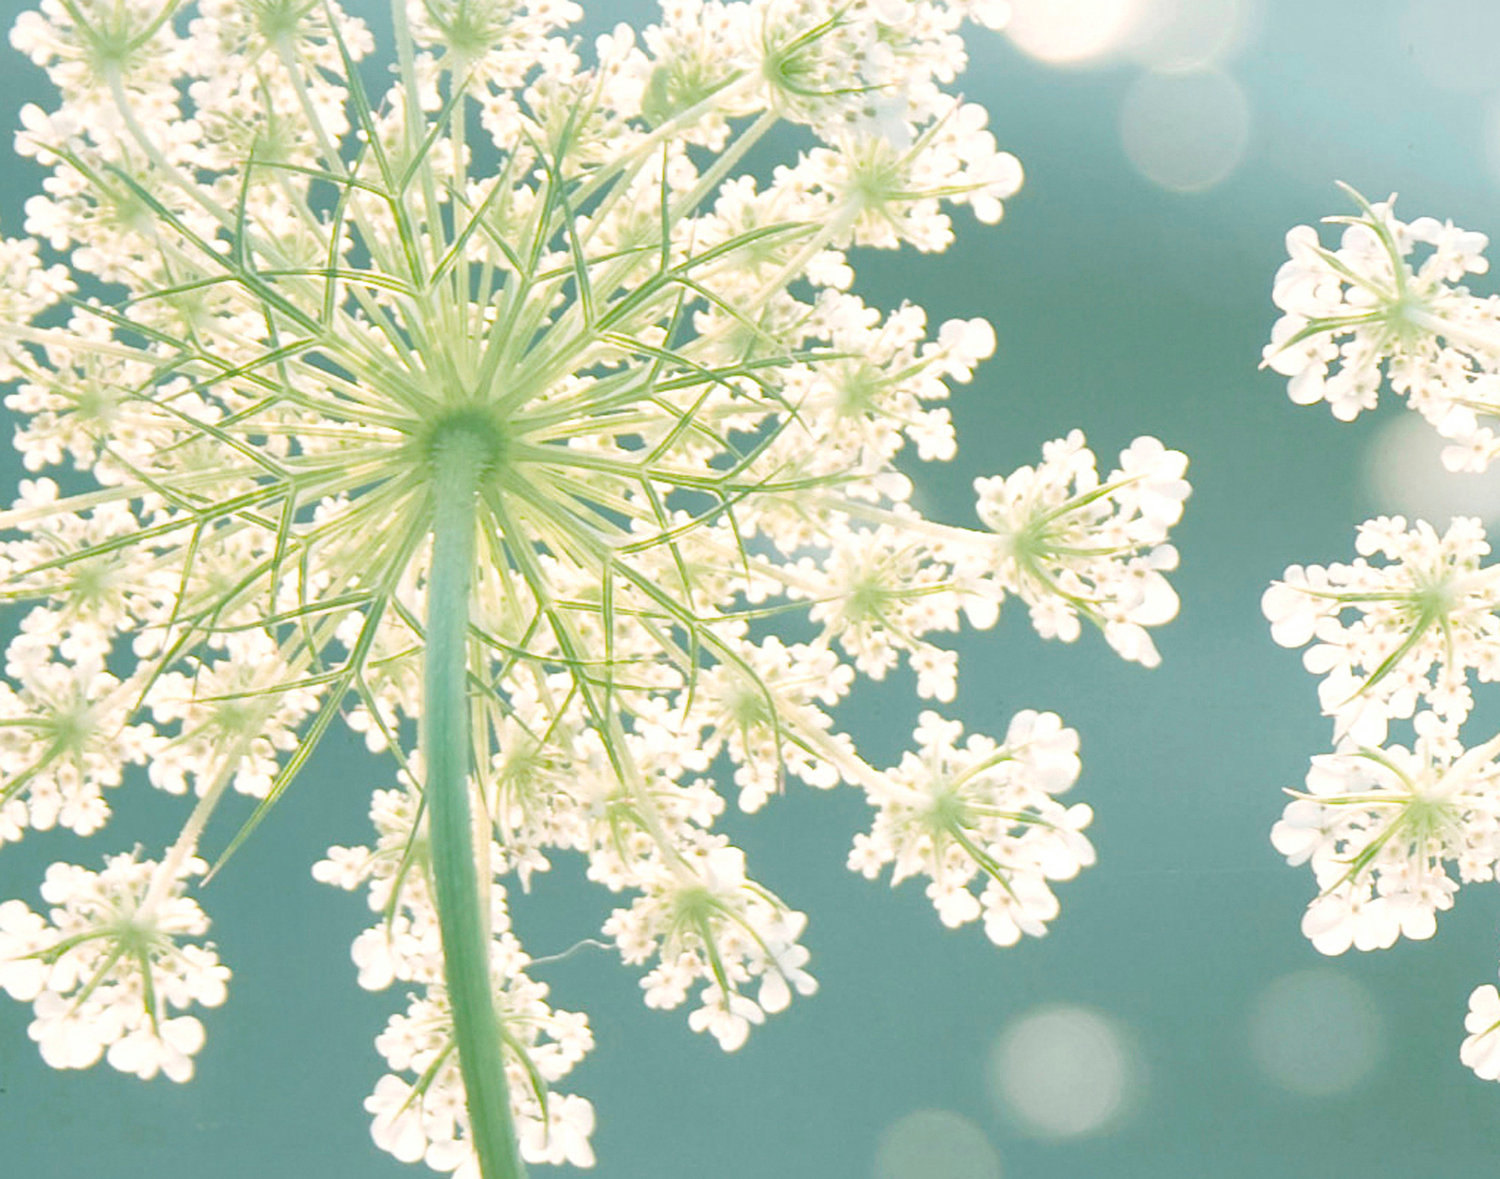 Thumbnail for the post titled: Queen Anne’s Lace: Weed, Flower, or Savior?